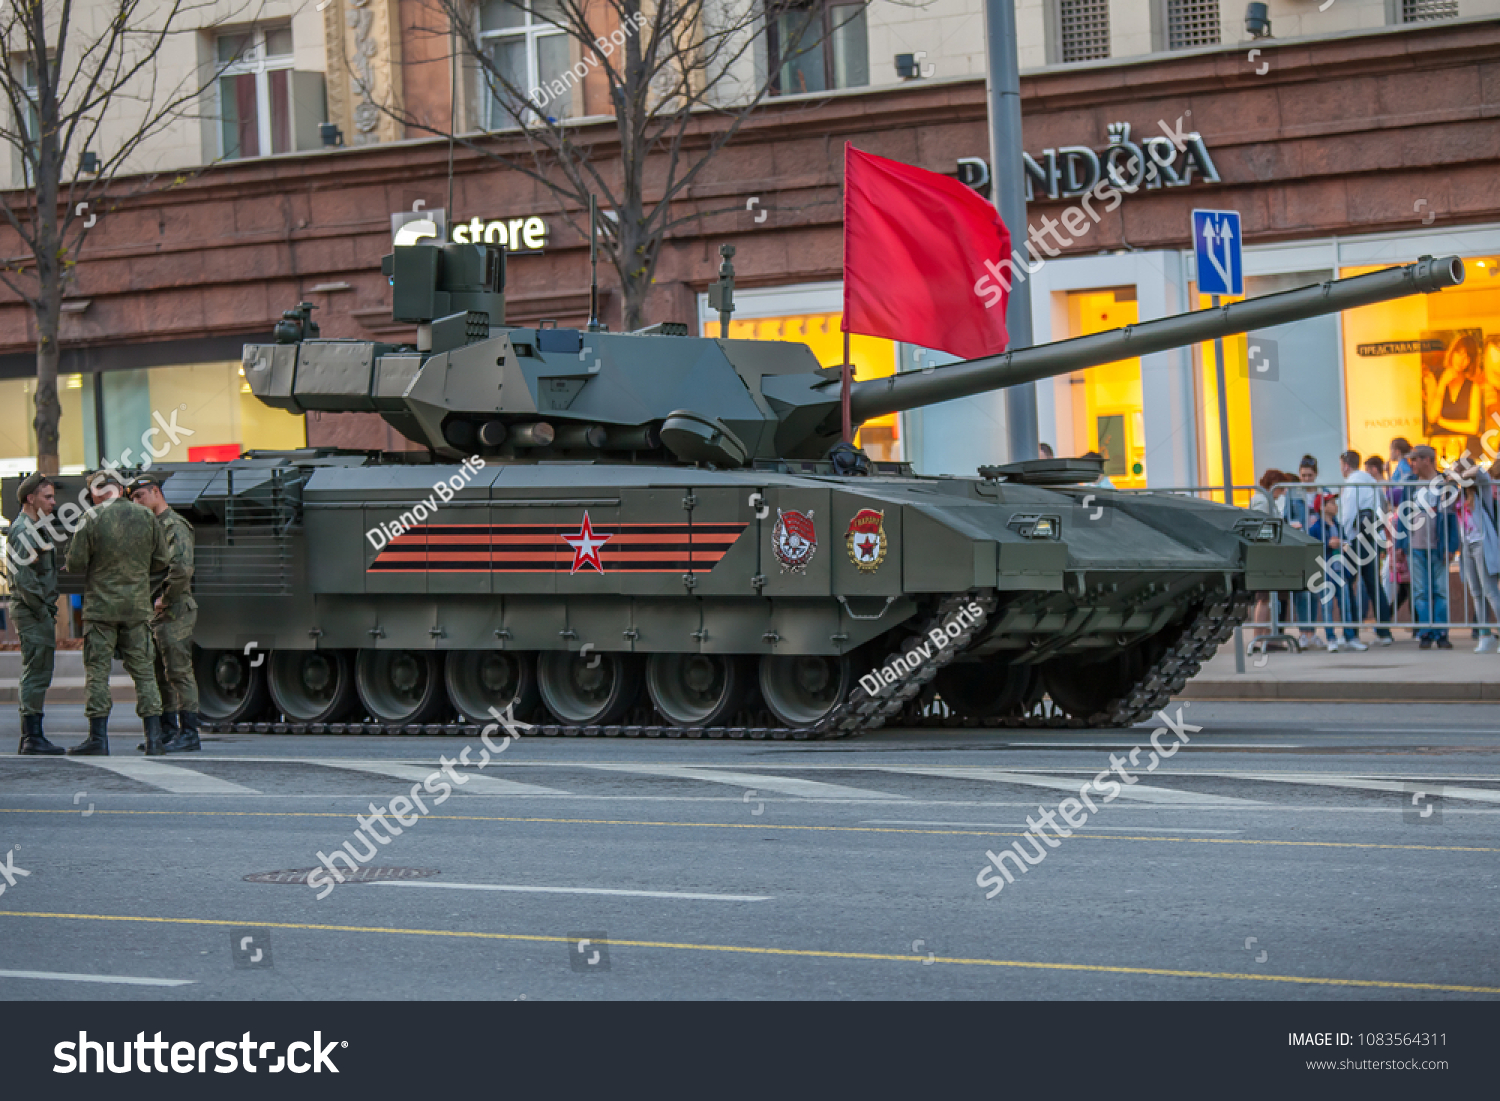 stock-photo-moscow-russia-may-t-armata-a-th-generation-russian-main-battle-tank-based-on-the-1083564311.jpg